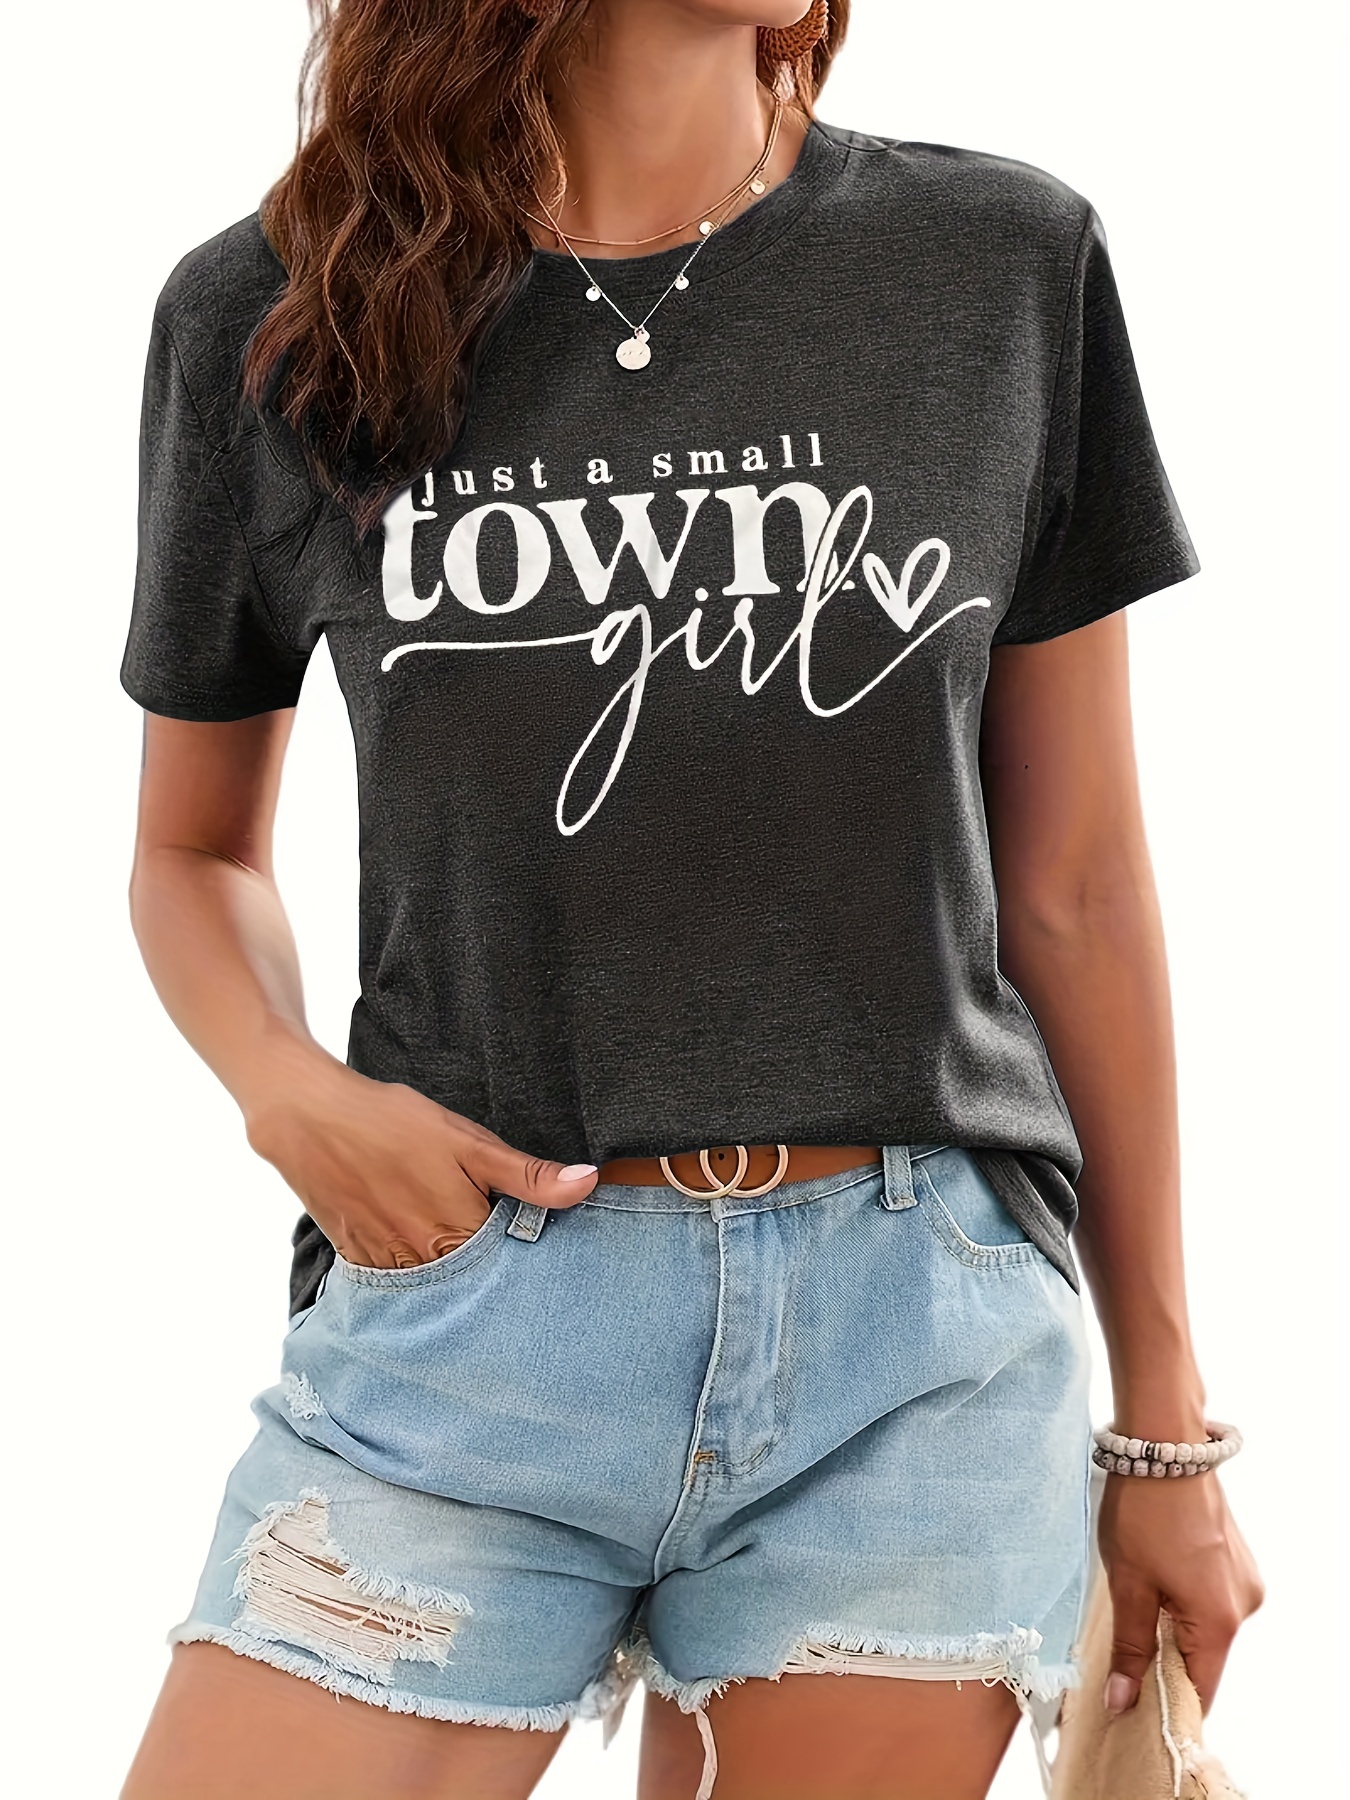 Just A Small Town Girl Letter Print T-shirt, Casual Crew Neck Short Sleeve  Summer T-shirt, Women's Clothing